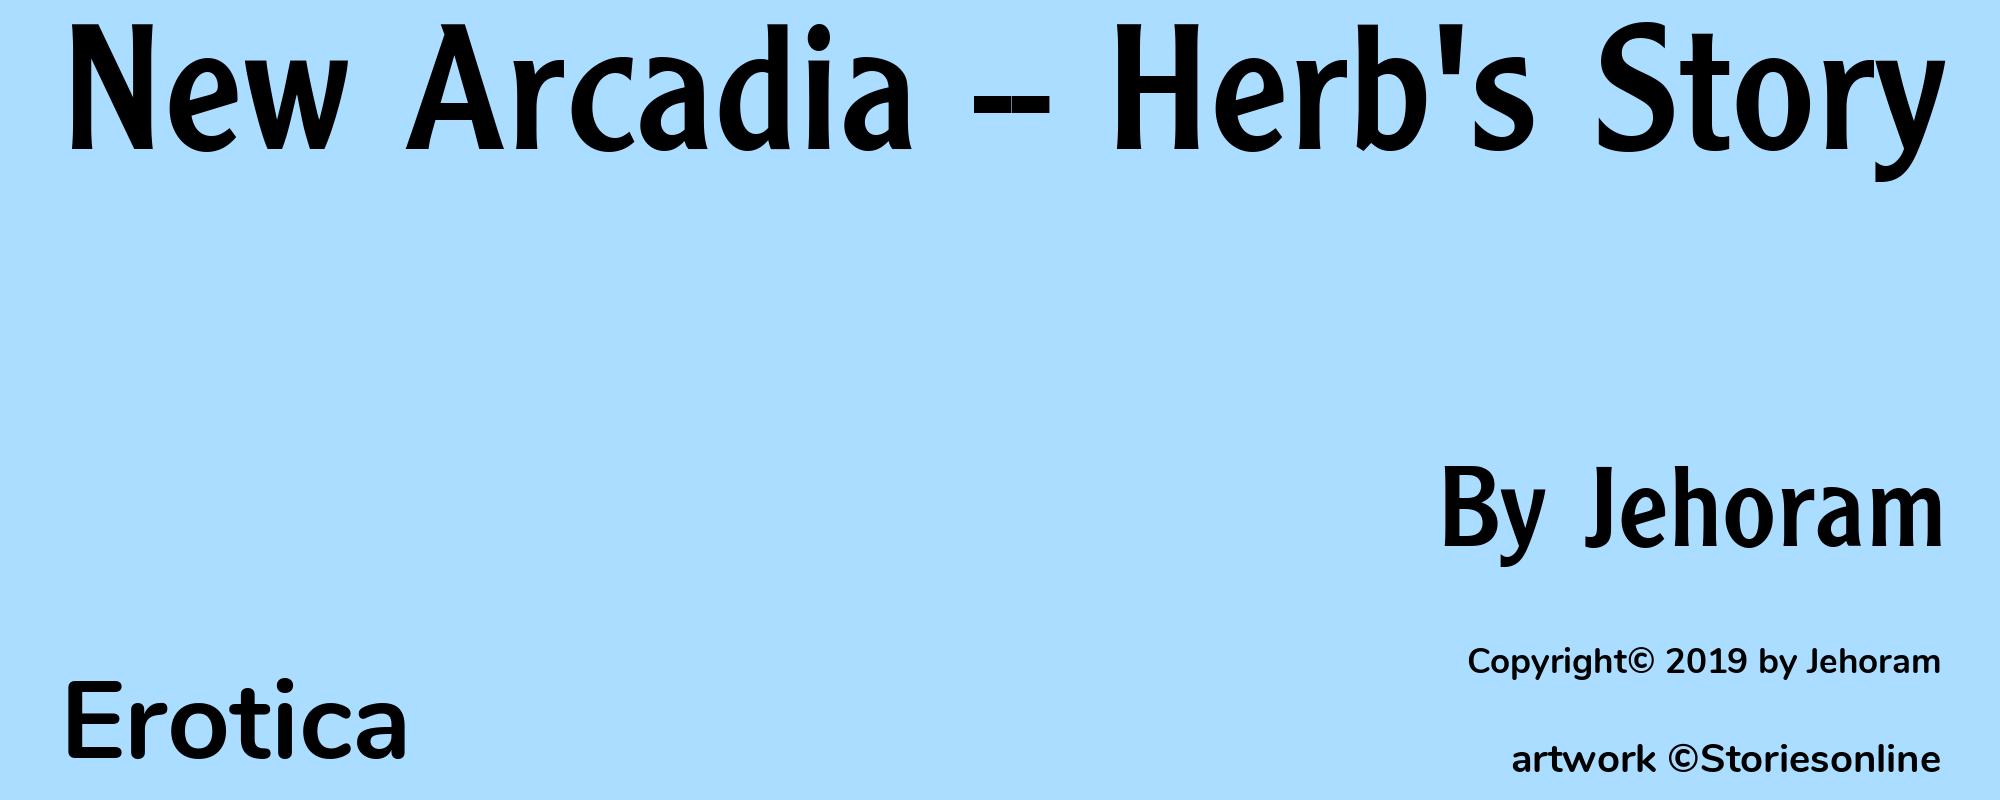 New Arcadia -- Herb's Story - Cover